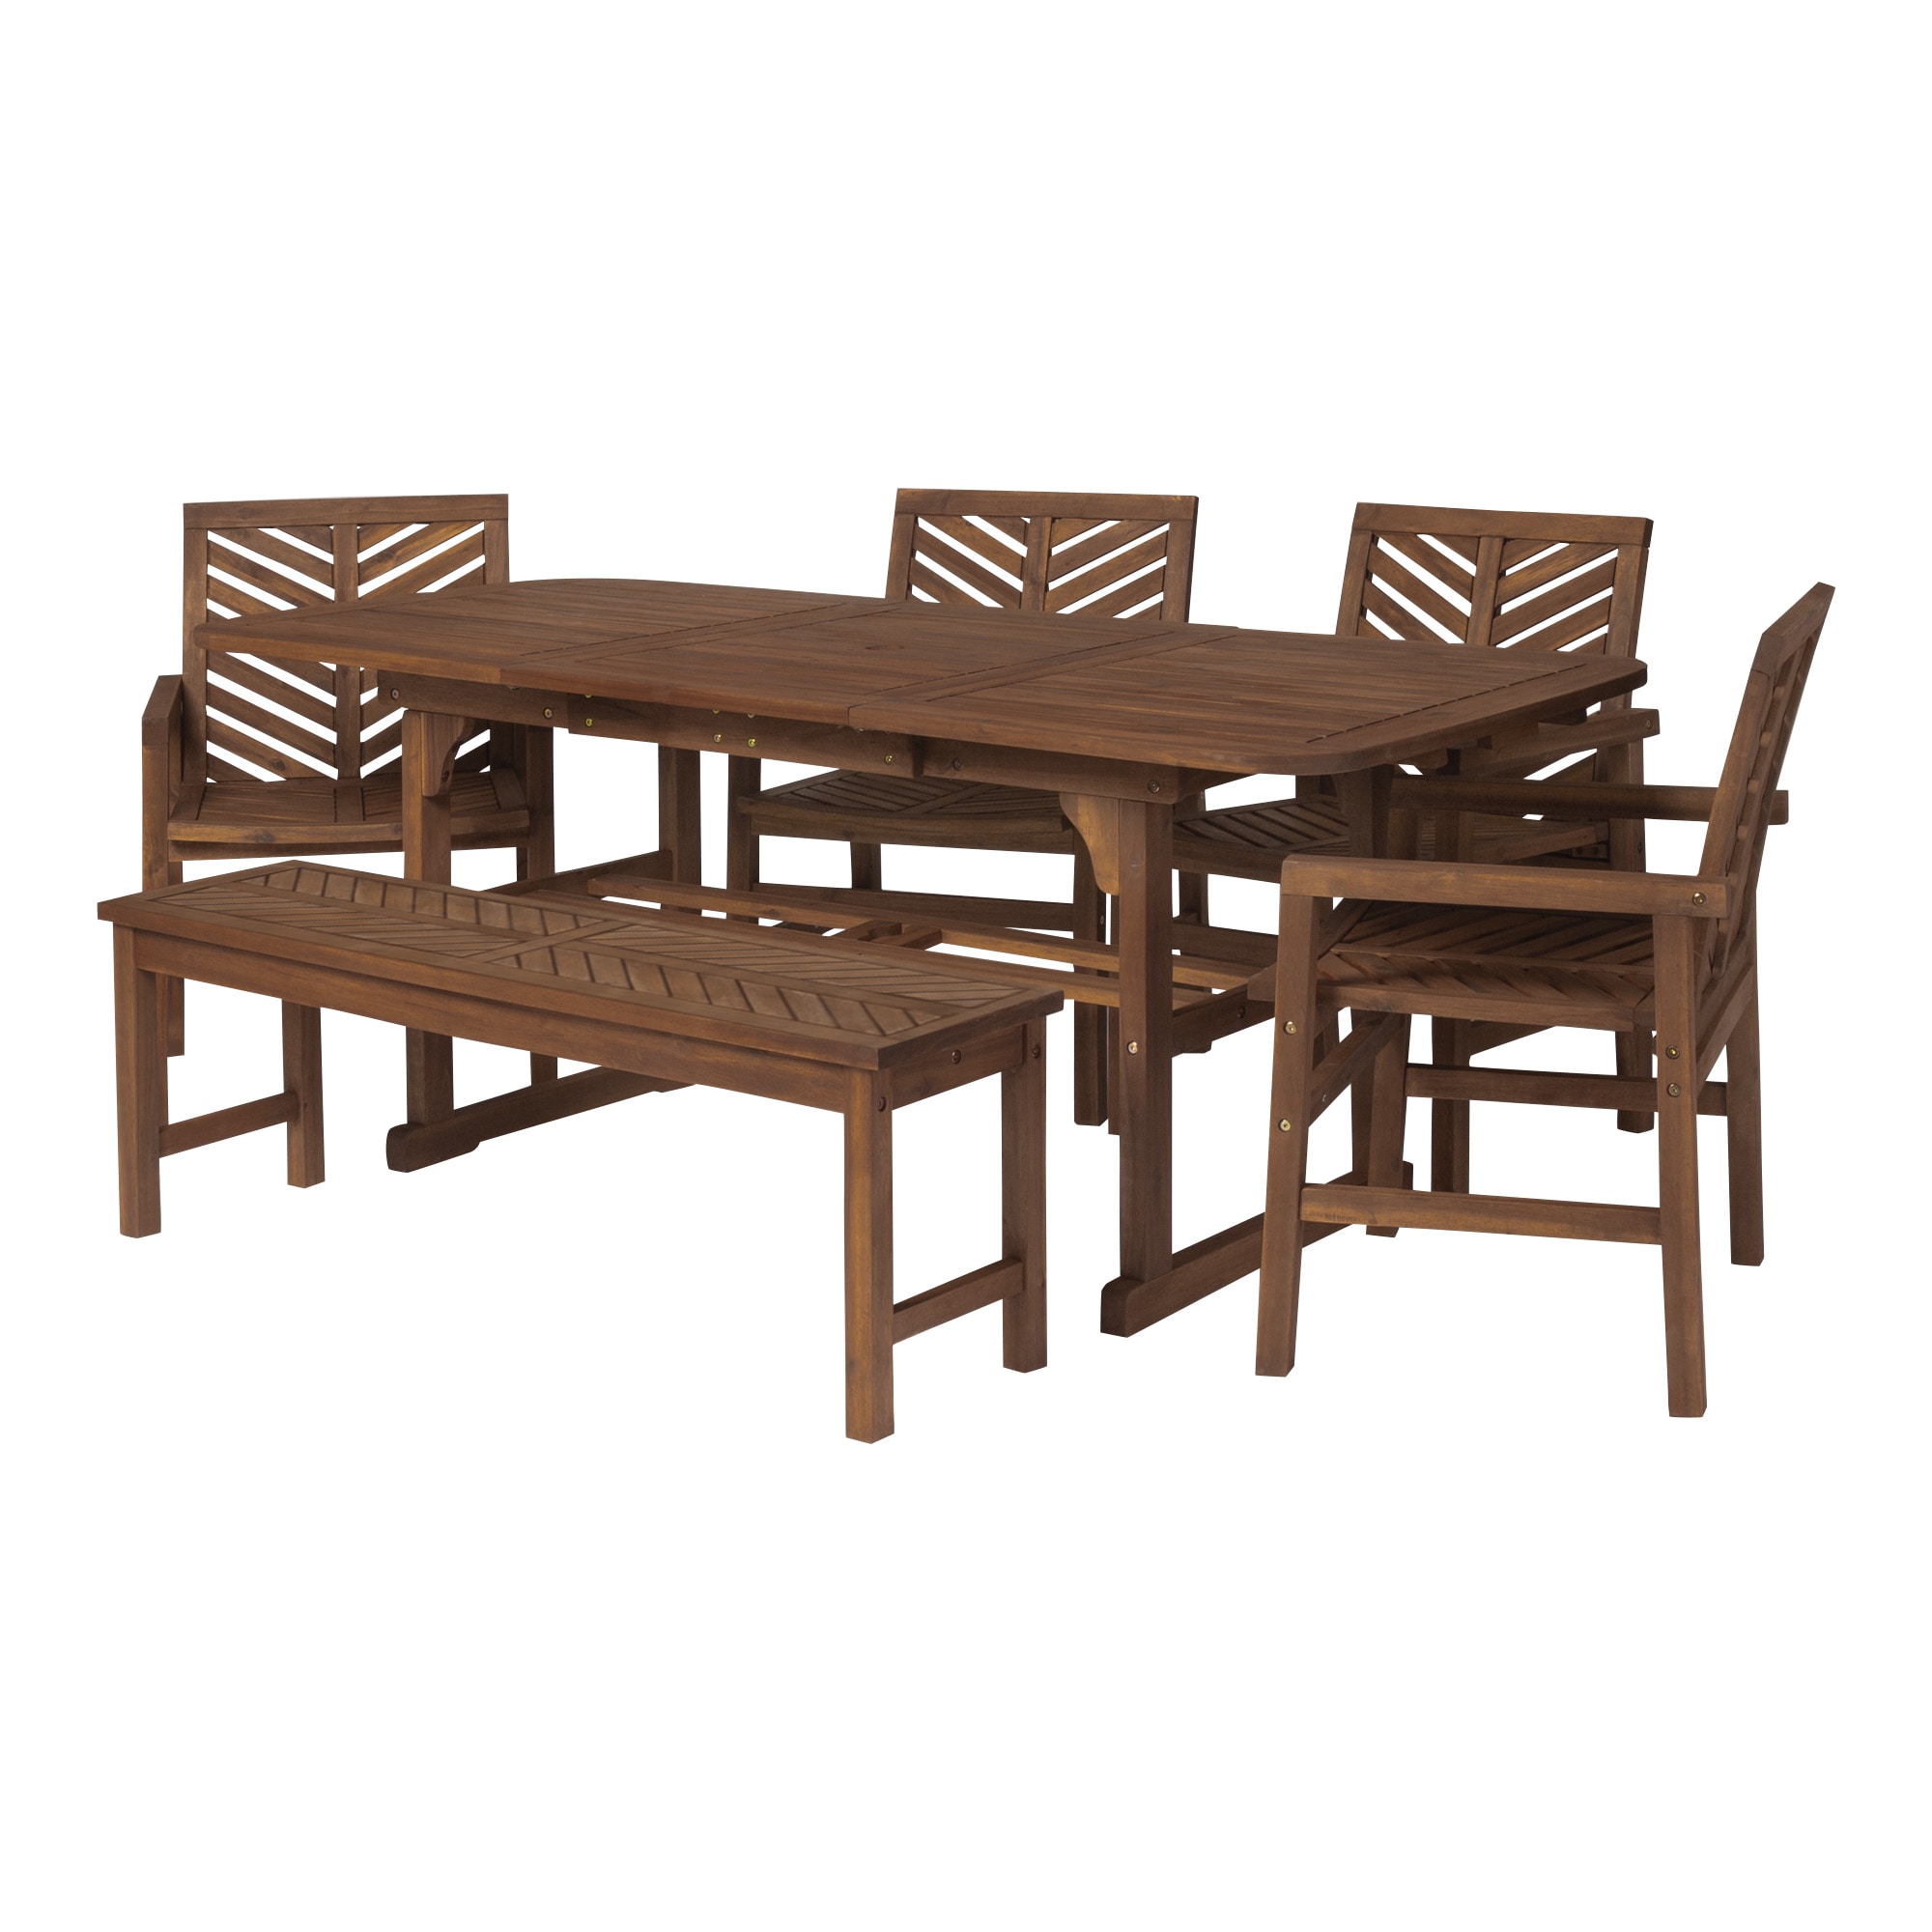 Walker Edison Furniture Company AZWHUD7CG Modern Outdoor Wood Patio Furniture Set Loveseat Chairs and Ottoman Side Table All Weather Backyard Conversation Garden Poolside Balcony Brown 